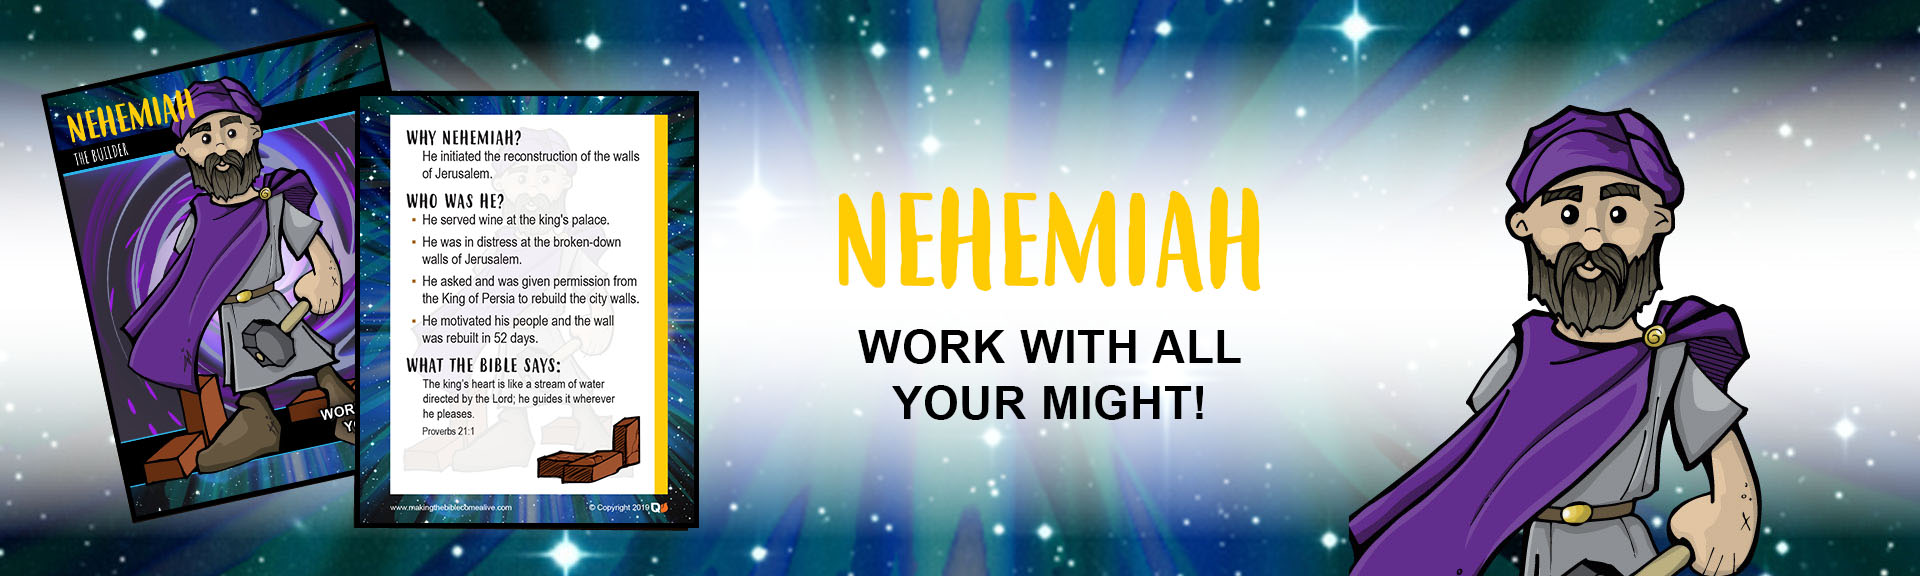 Nehemiah | Making the Bible Come Alive